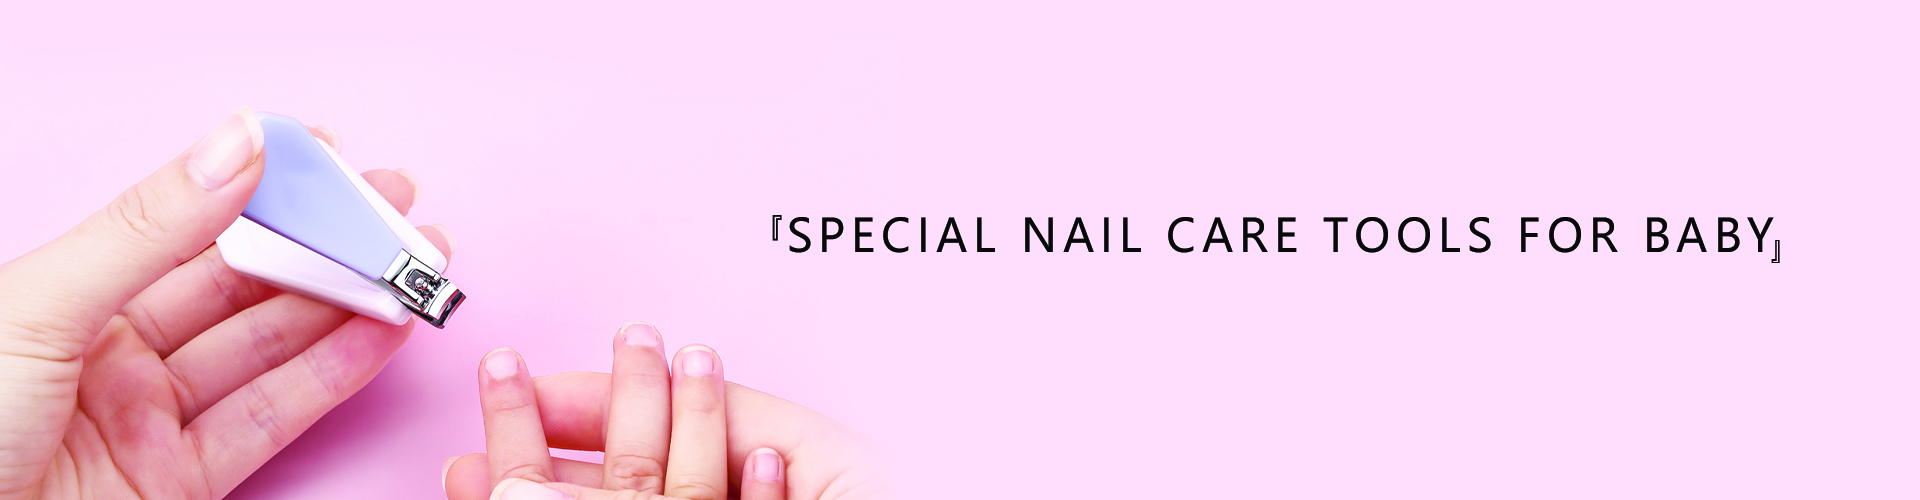 special nail care tools for baby